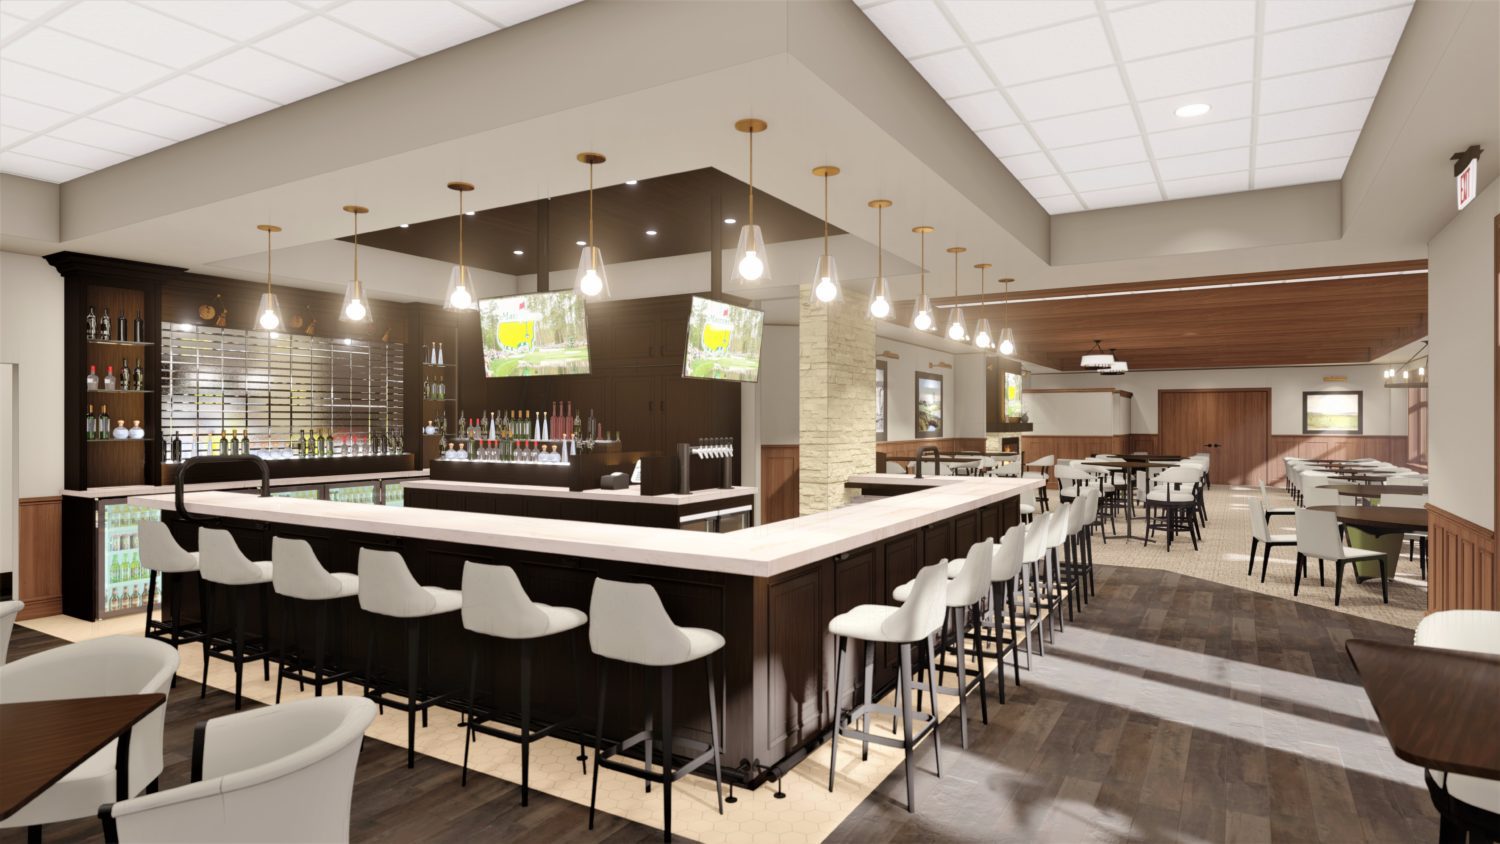 Country club interior dining space and bar rendering